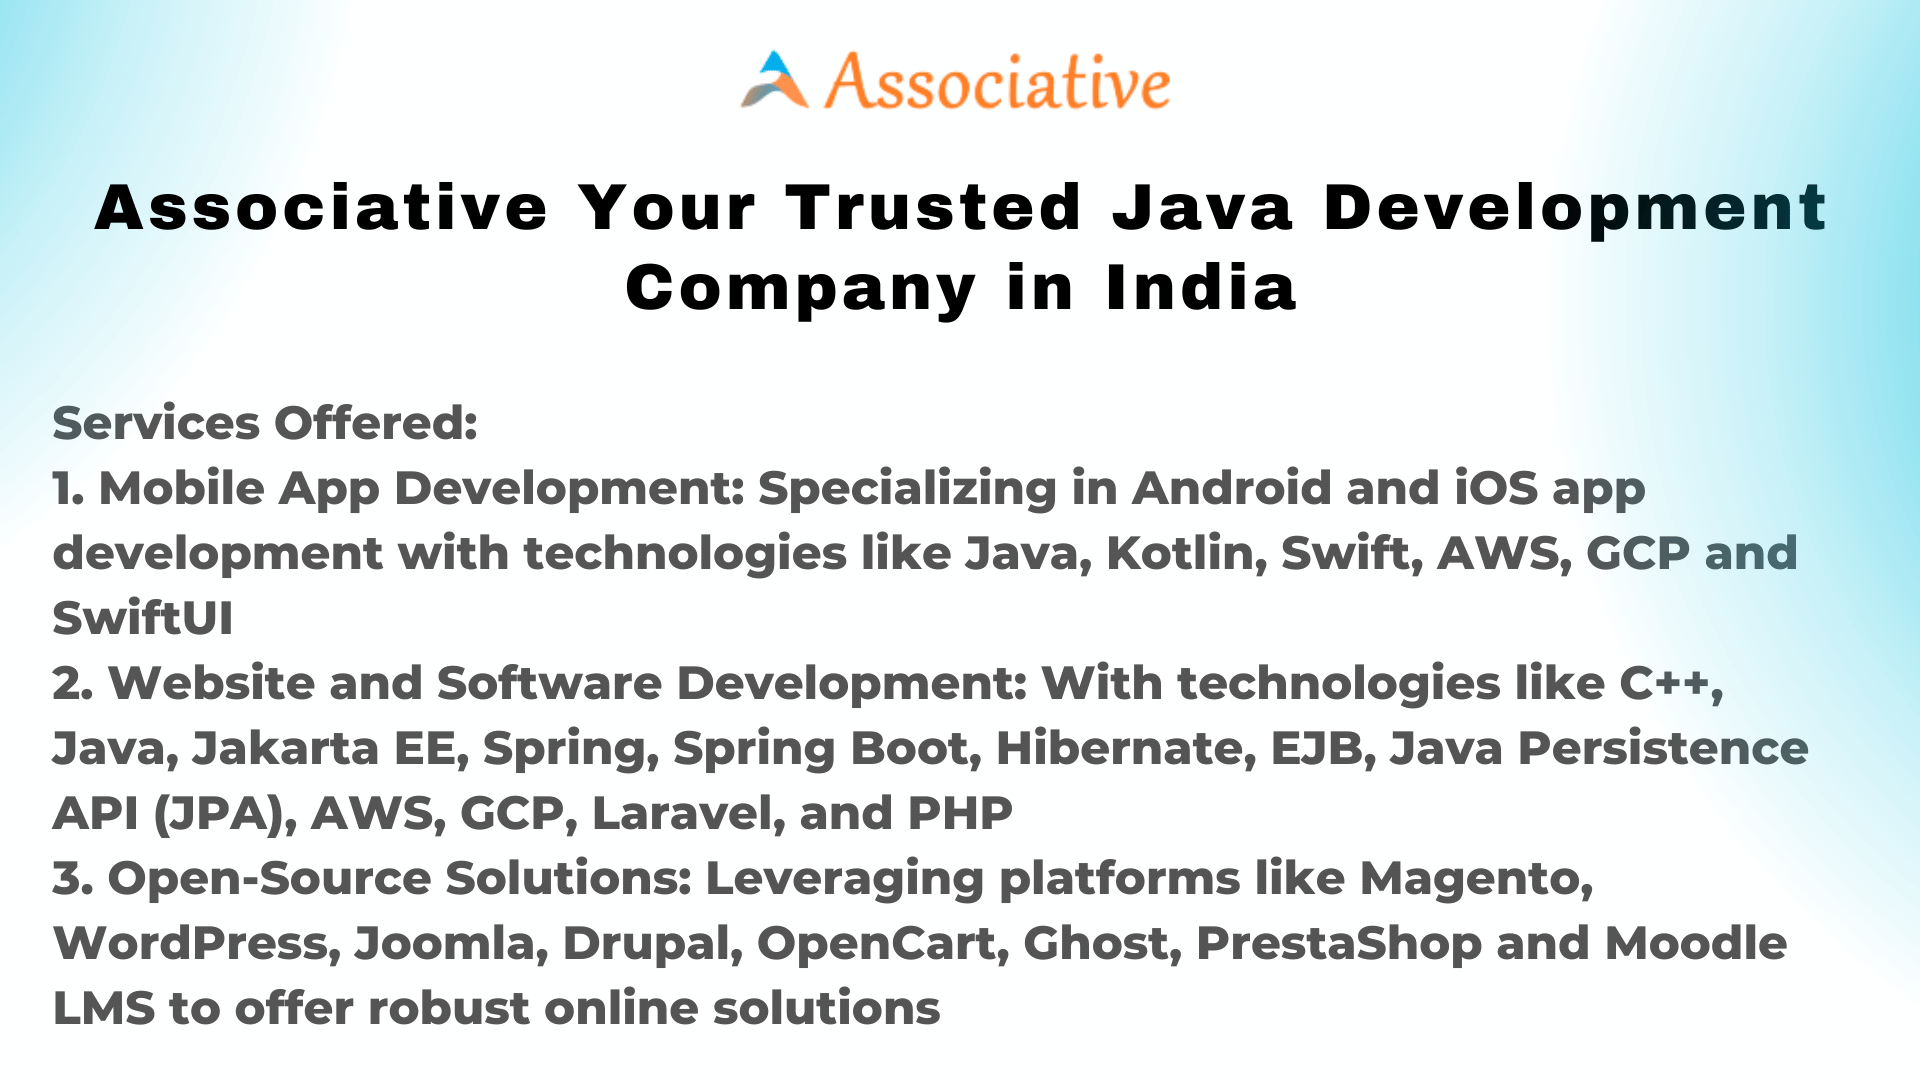 Associative Your Trusted Java Development Company in India